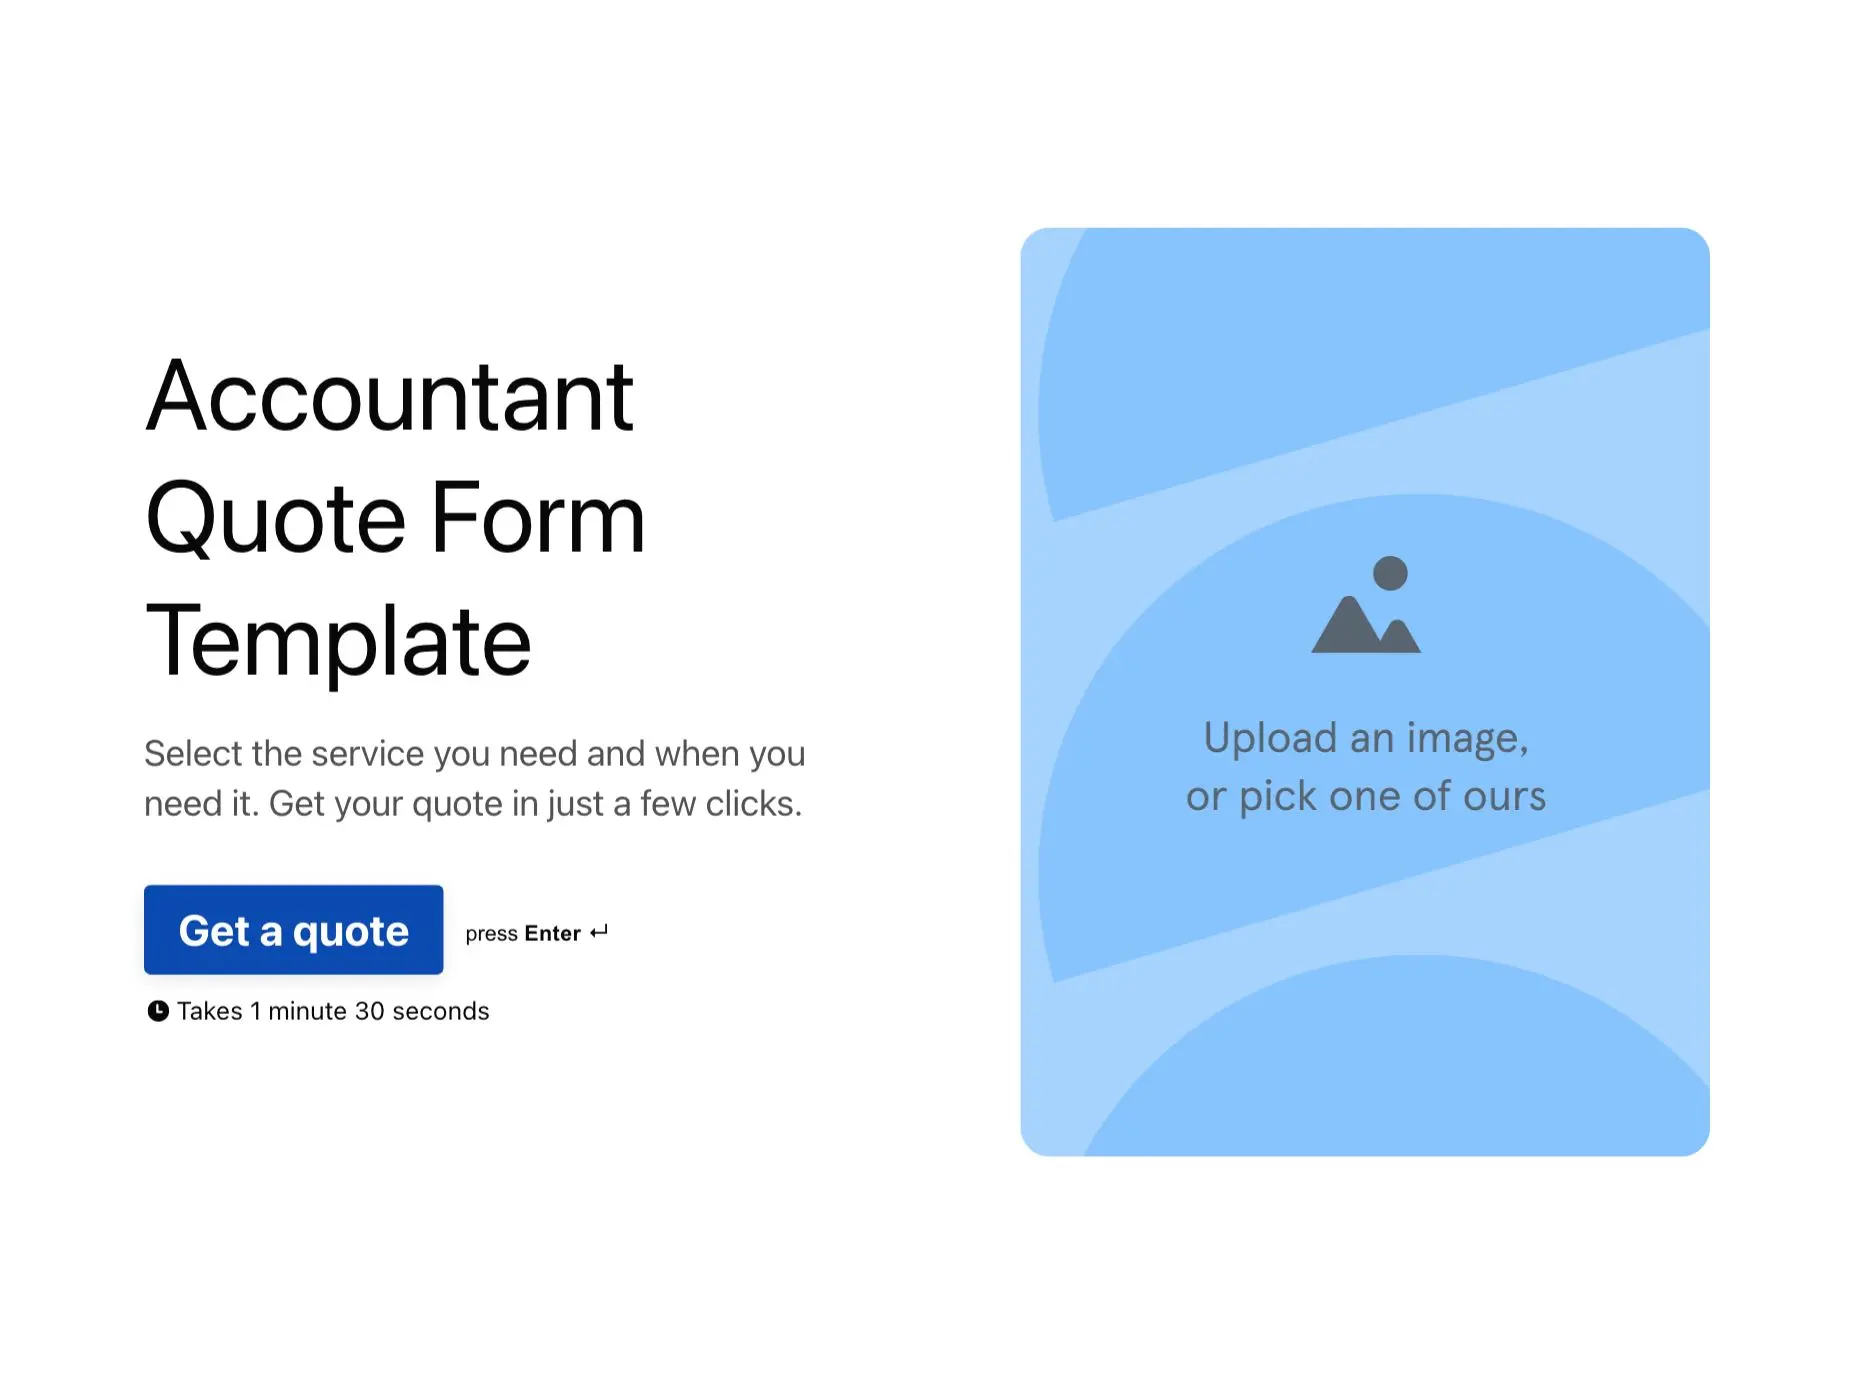 Accountant Quote Form Template Hero